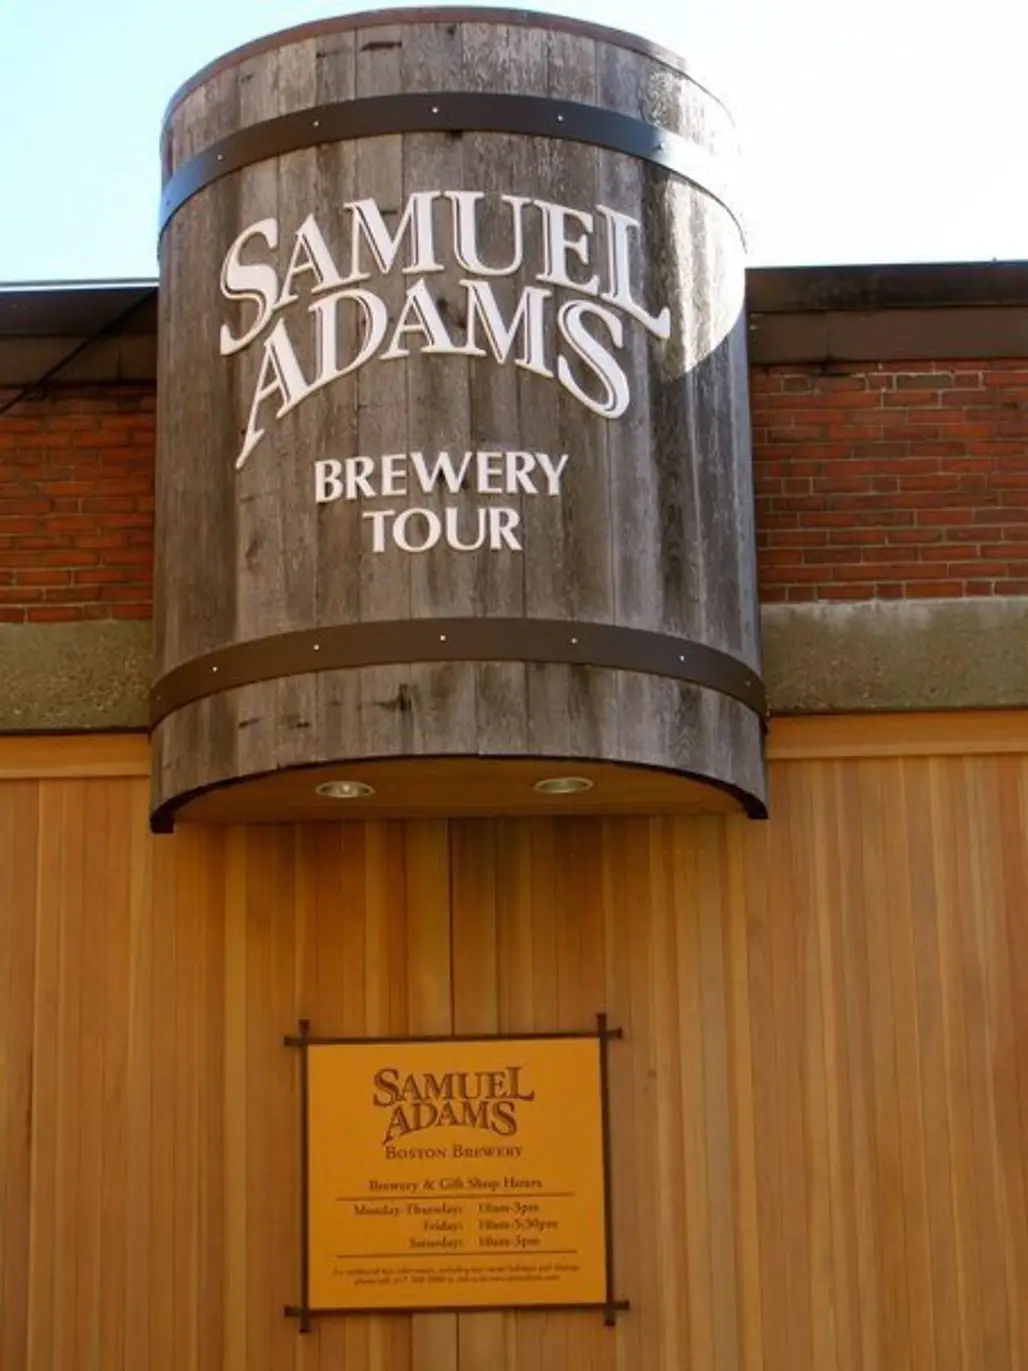 Samuel Adams Brewery,Samuel Adams,Samuel Adams,man made object,drink,